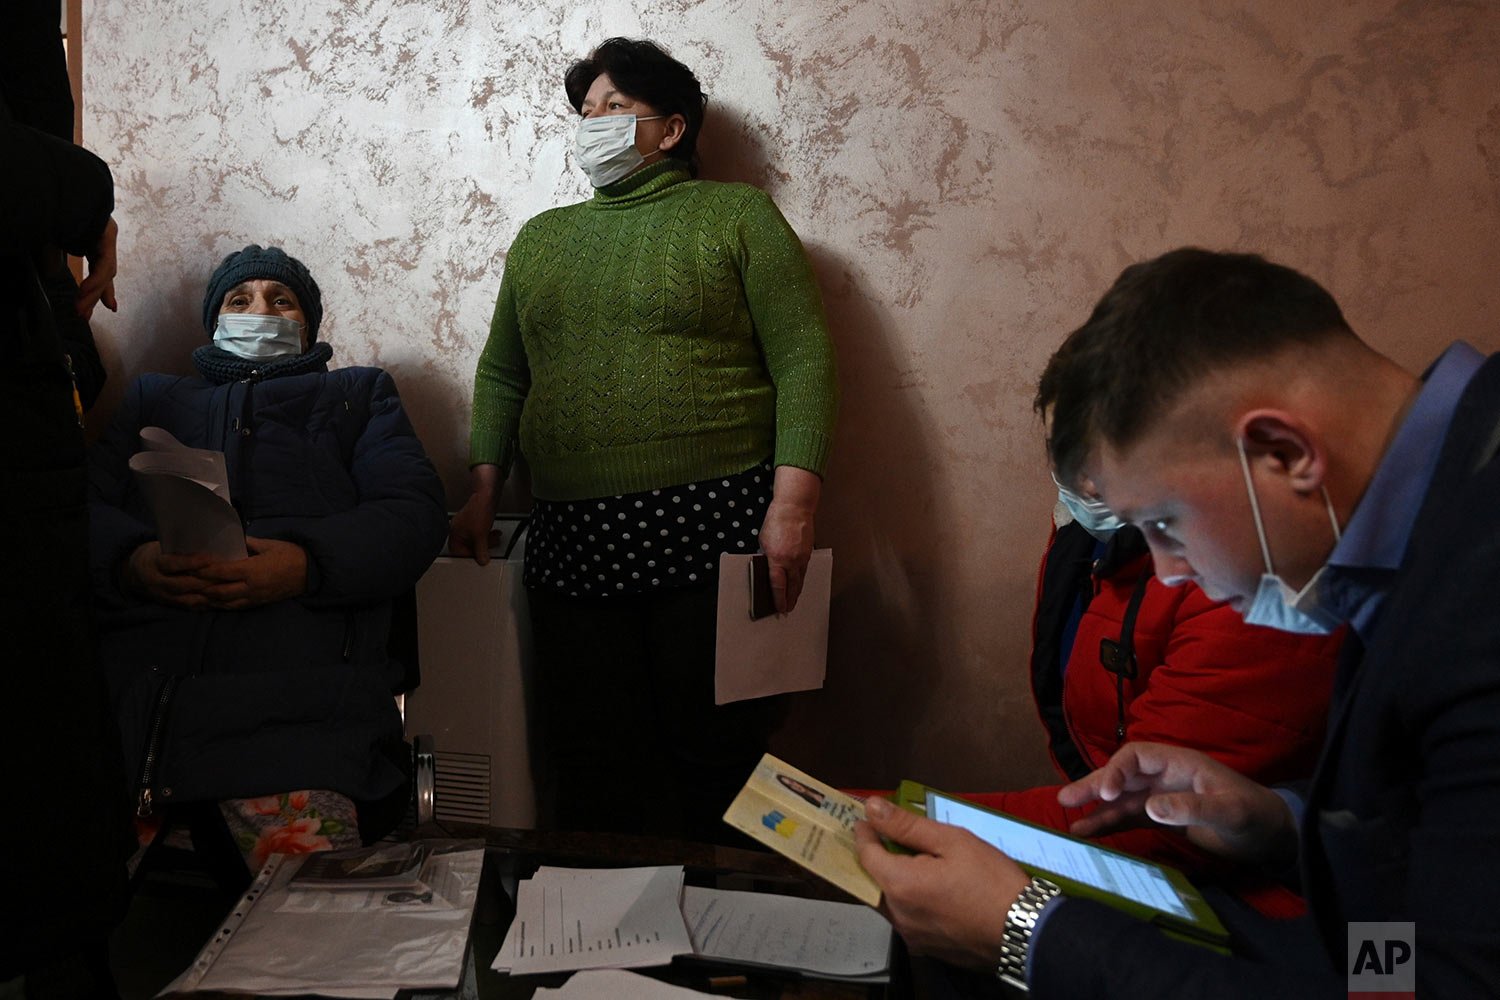  People from Donetsk, the territory controlled by a pro-Russia separatist government in eastern Ukraine, gather to fill in documents after evacuating in the Rostov-on-Don region, near the border with Ukraine, Russia, Sunday, Feb. 20, 2022. (AP Photo)